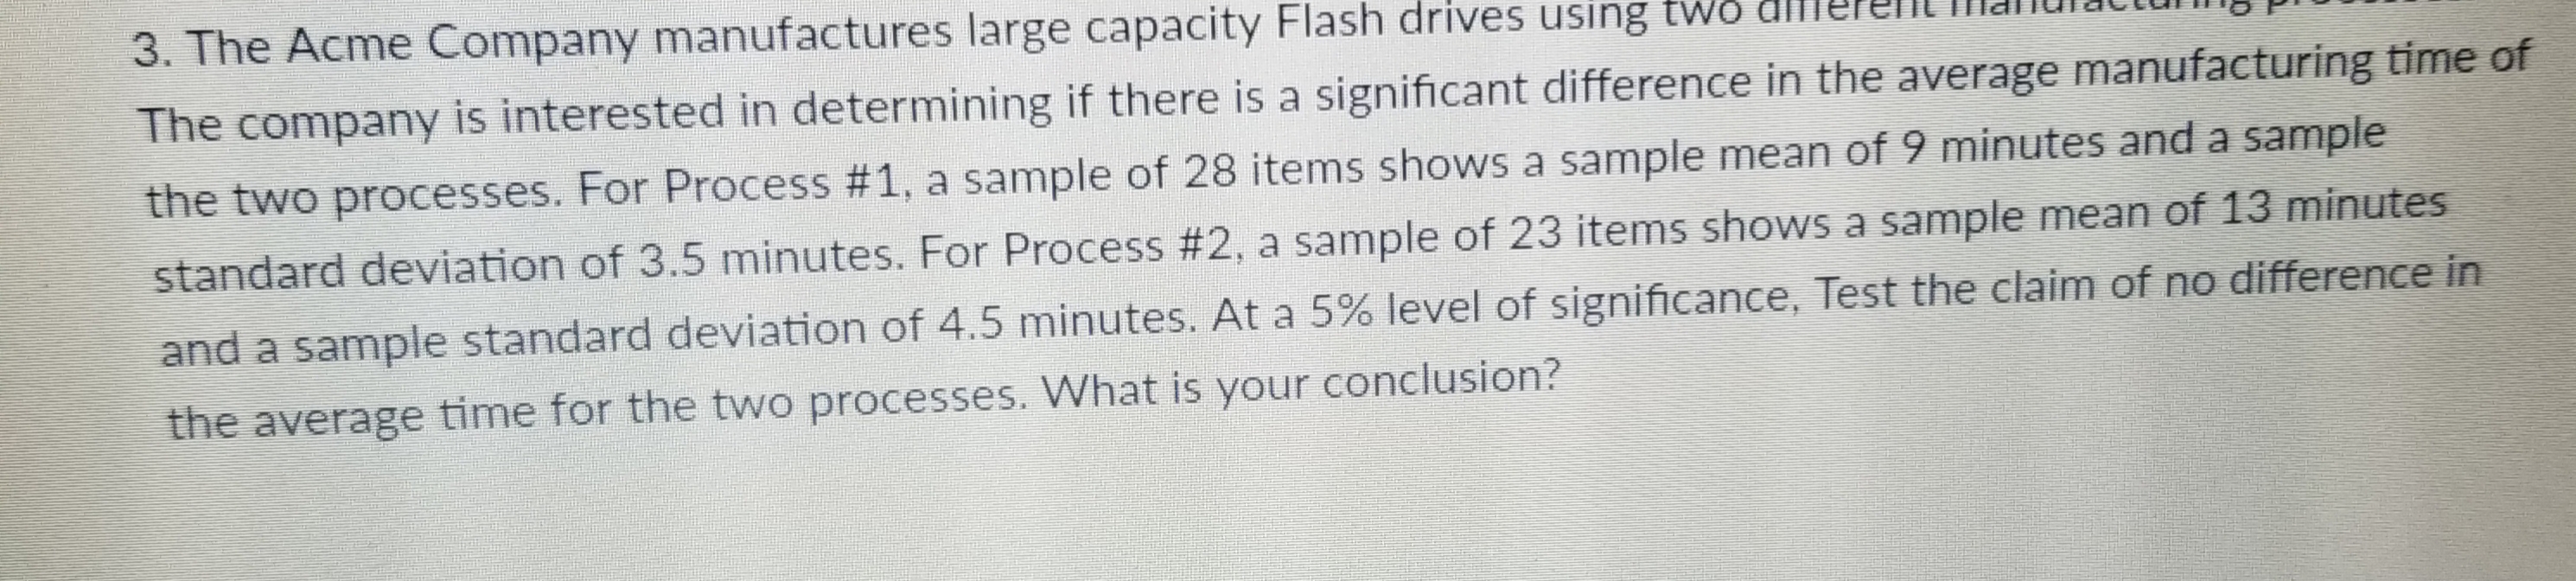 e Acme Company manufactures large capacity Flash drives using tws dlllere
The company is interested in determining if there is a significant difference in the average manufacturing time of
the two processes. For Process #1, a sample of 28 items shows a sample mean of 9 minutes and a sample
standard deviation of 3.5 minutes. For Process #2, a sample of 23 items shows a sample mean of 13 minutes
and a sample standard deviation of 4.5 minutes. At a 5% level of significance, Test the claim of no difference in
the average time for the two processes. What is your conclusion?
